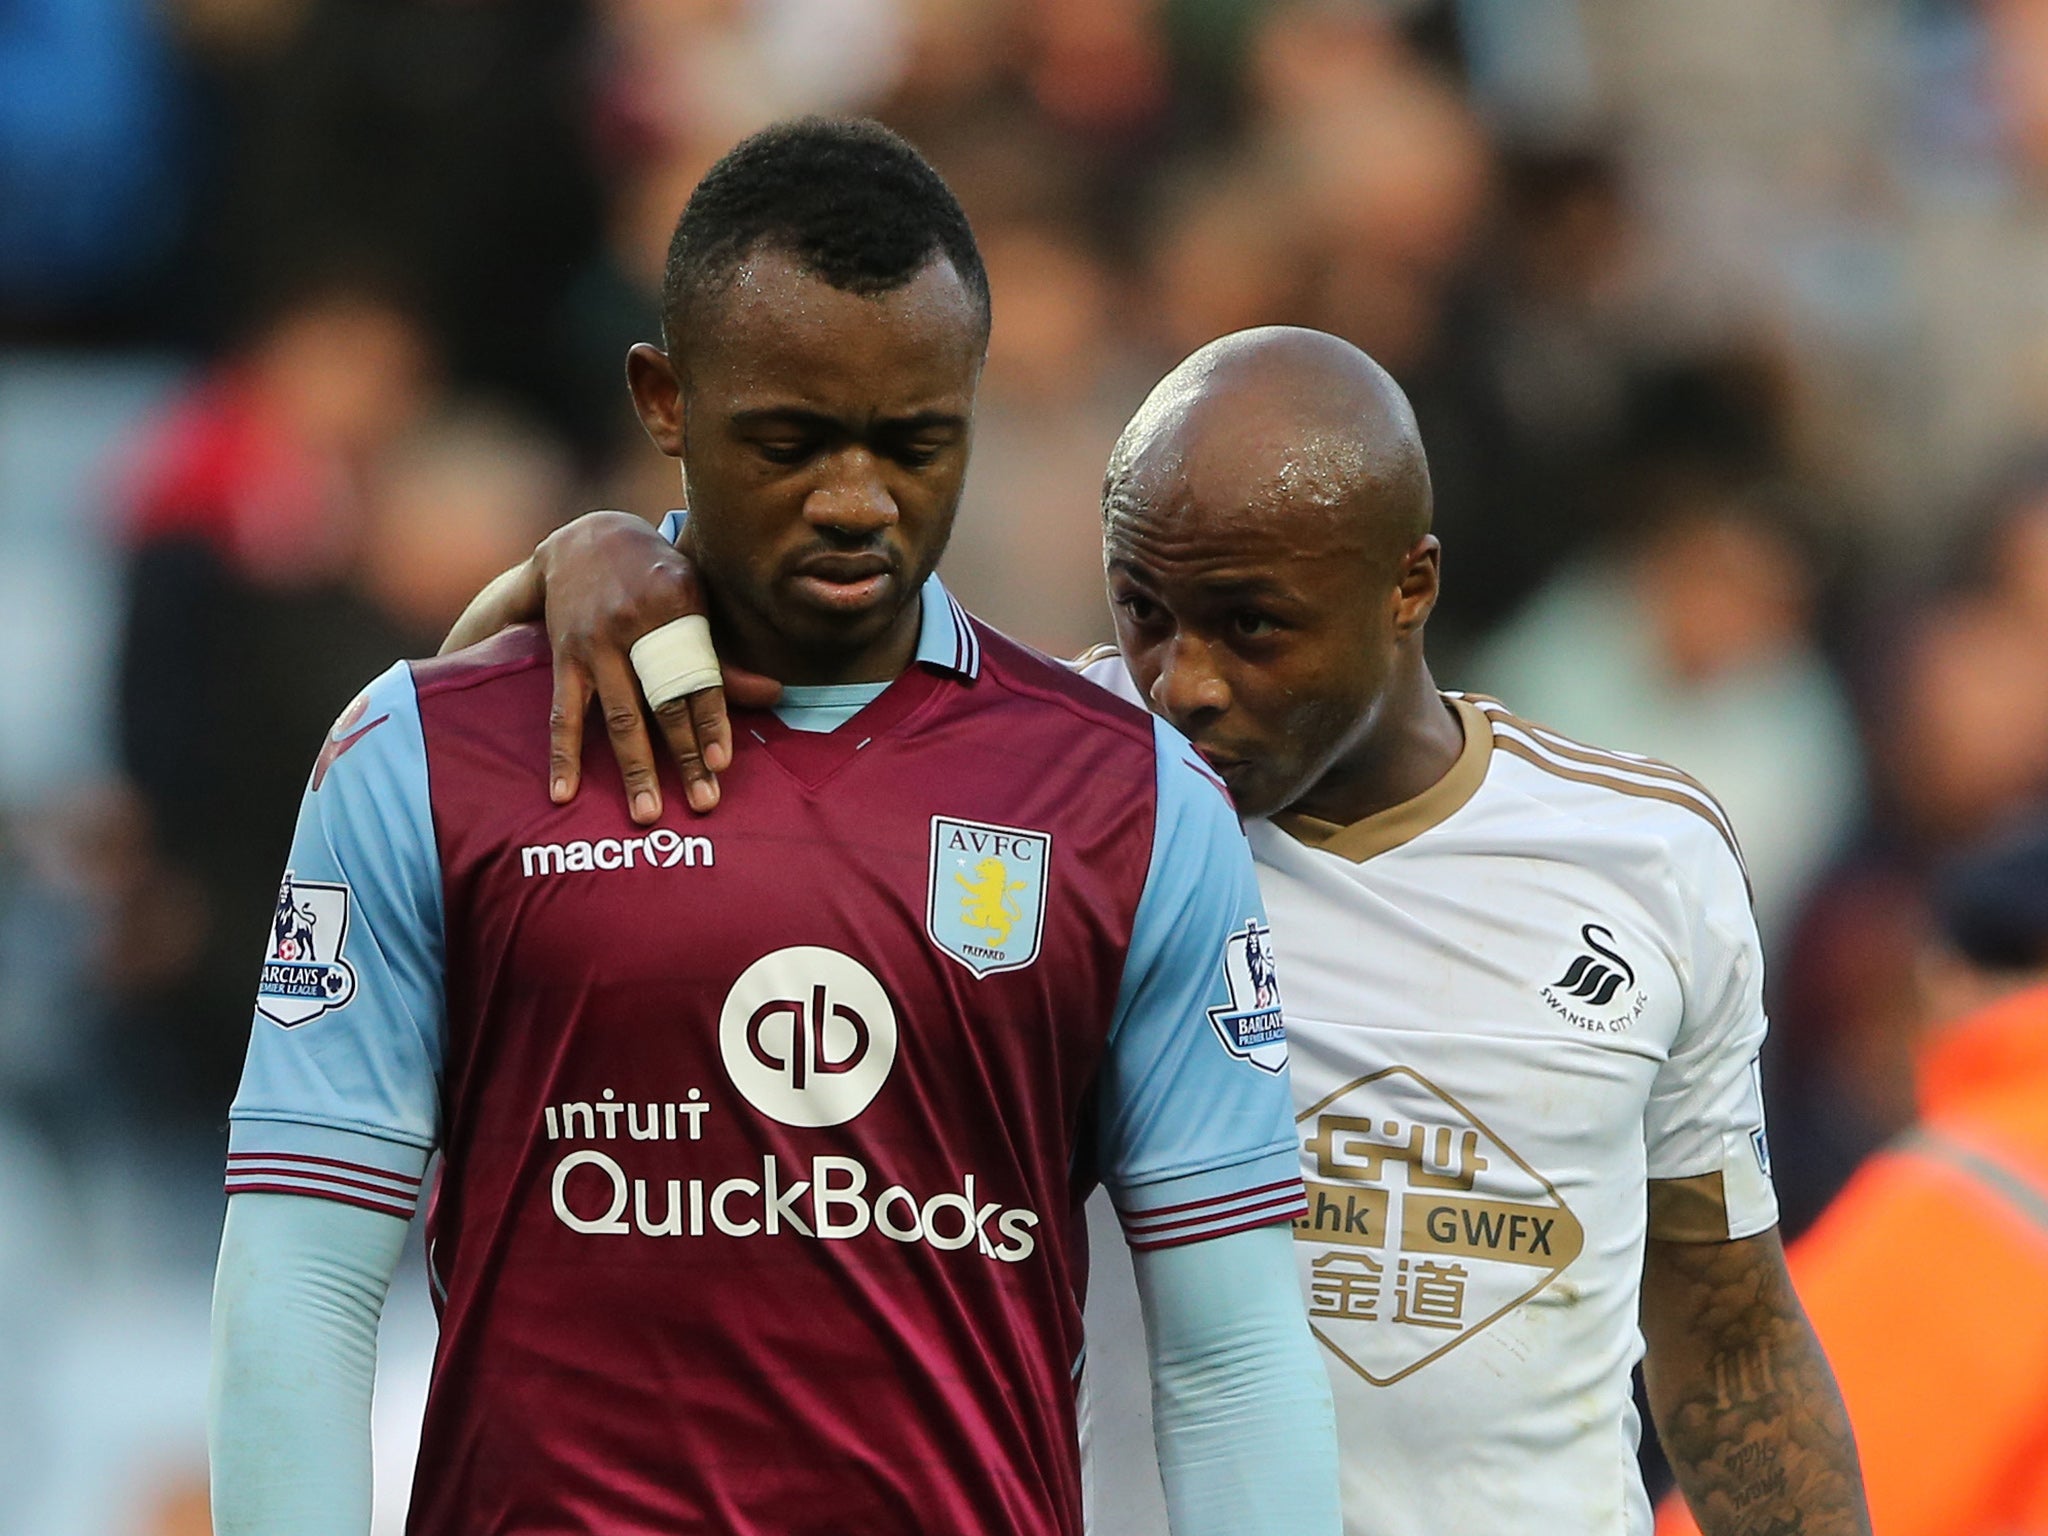 Andre Ayew, scorer of Swansea's winning goal, consoles his brother Jordan, who notched Aston Villa's opener